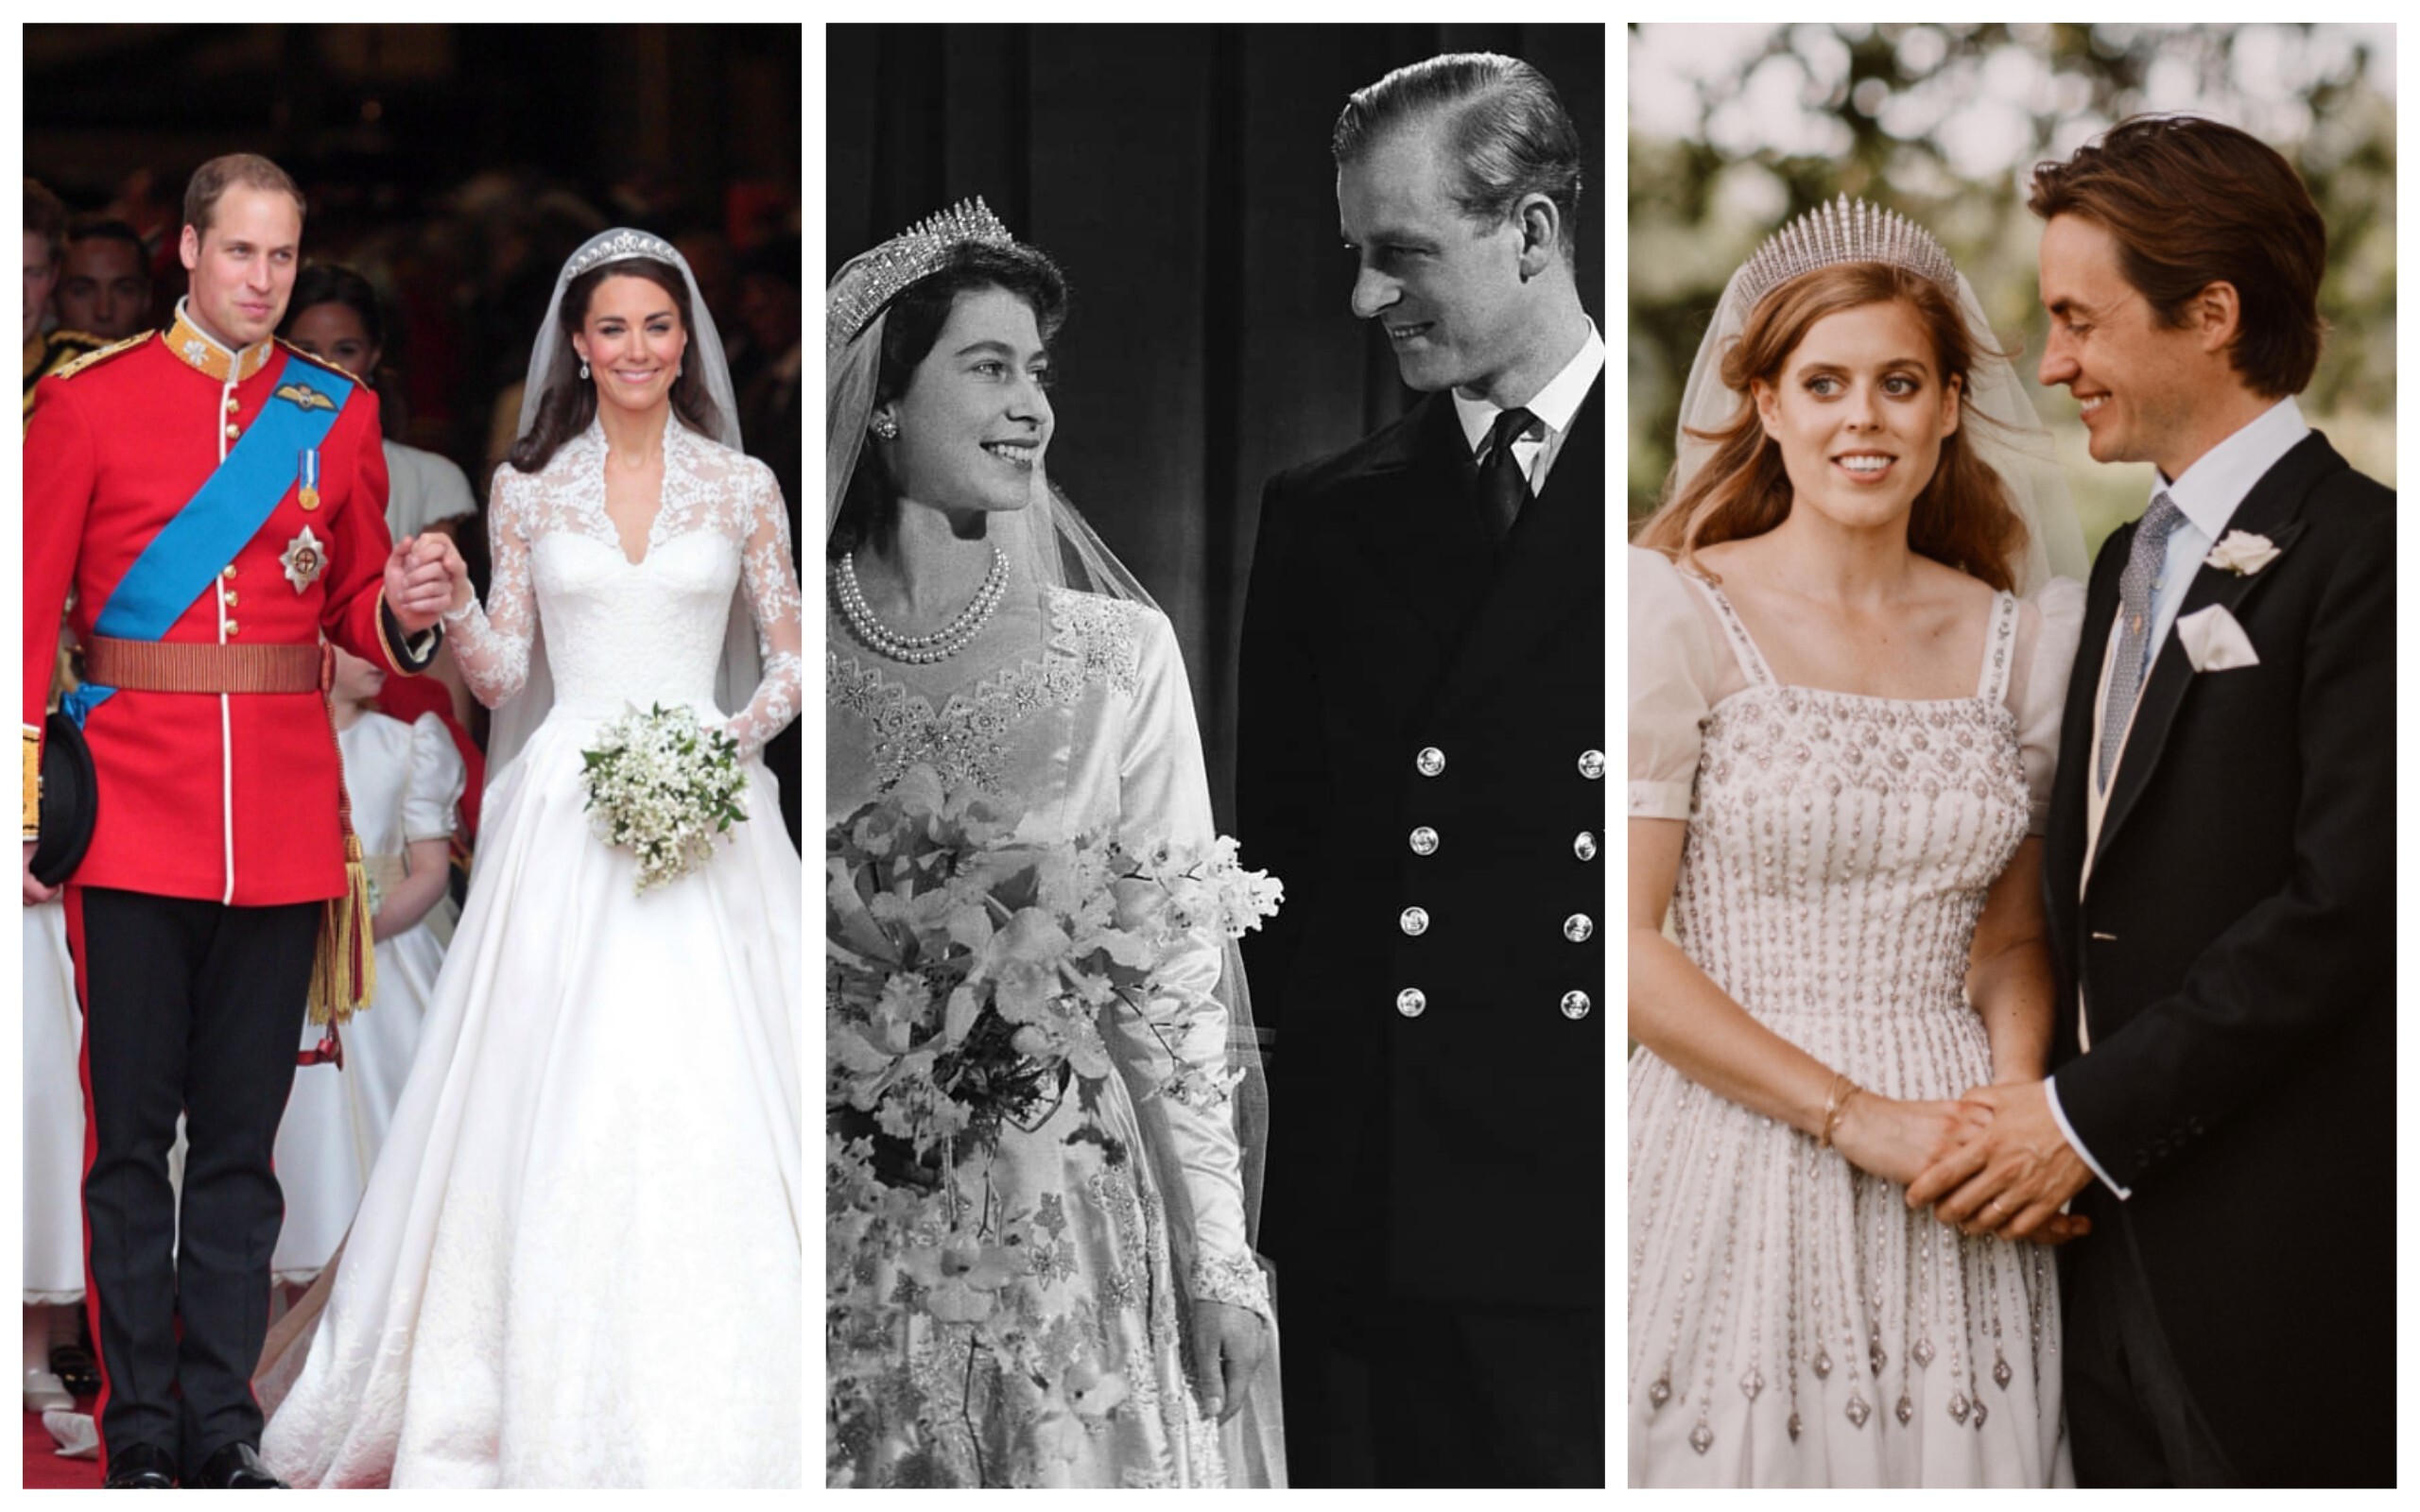 From Prince William and Kate Middleton to Prince Phillip and Queen Elizabeth, members of the British royal family have made some surprising cost-cutting decisions when it comes to weddings. Photo: EPA, @culturedessert/Instagram, Reuters